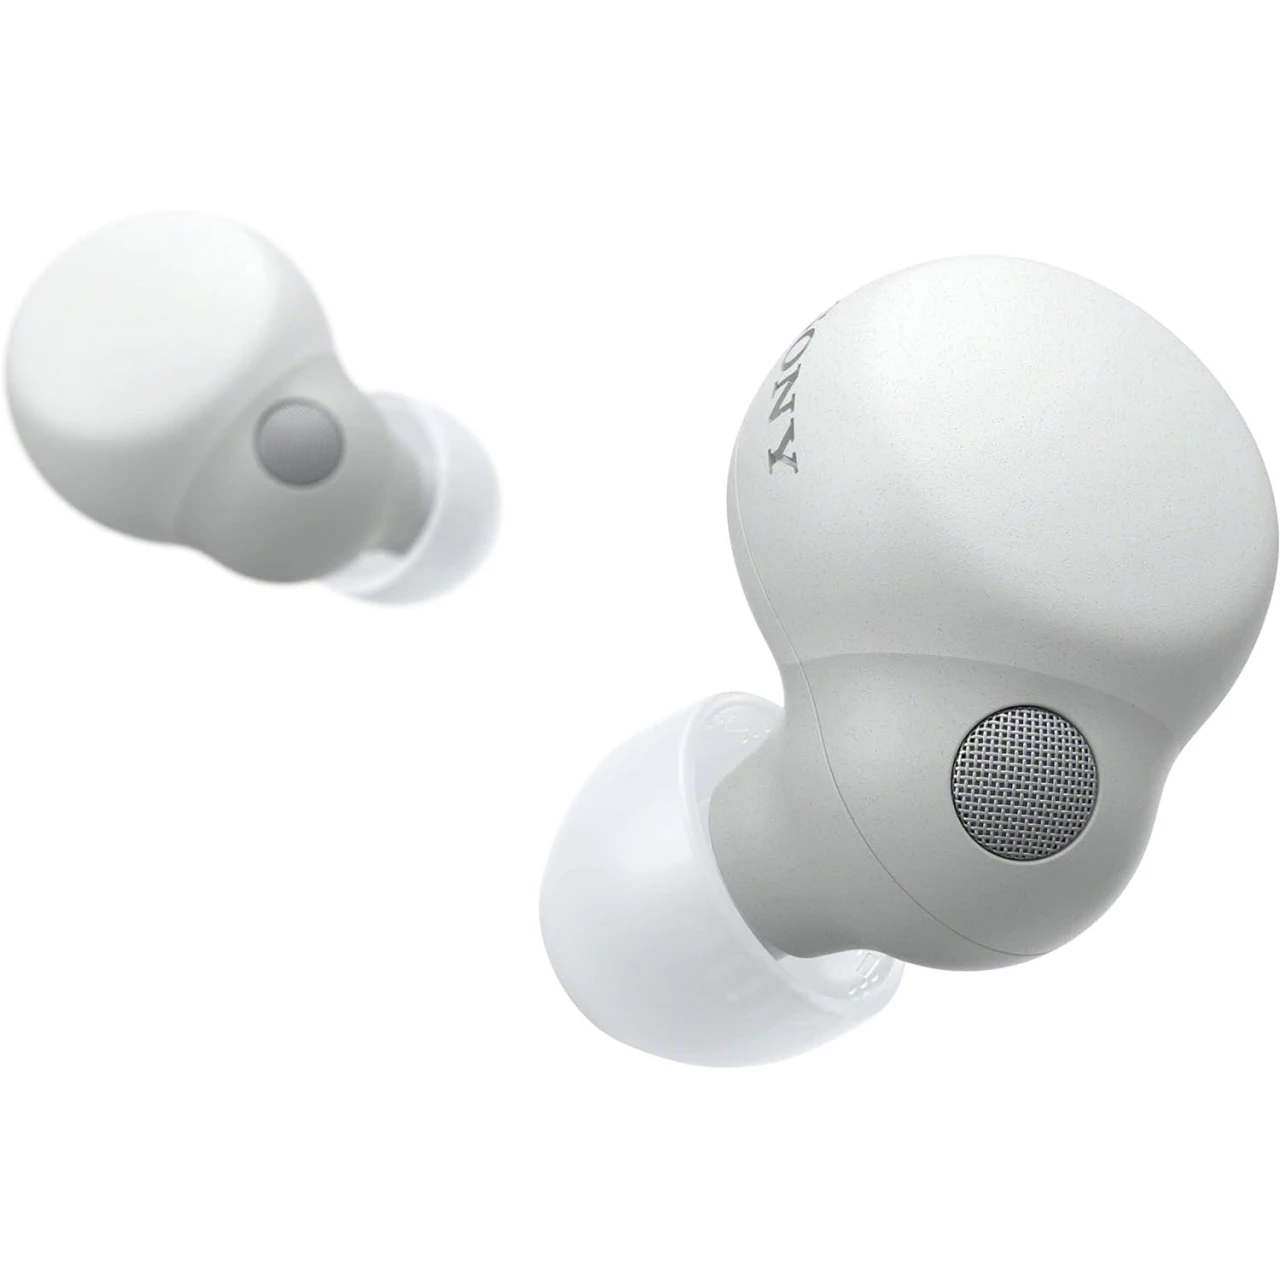 Sony LinkBuds S Truly Wireless Noise Canceling Earbud Headphones with Alexa Built-in, Bluetooth Ear Buds Compatible with iPhone and Android, White